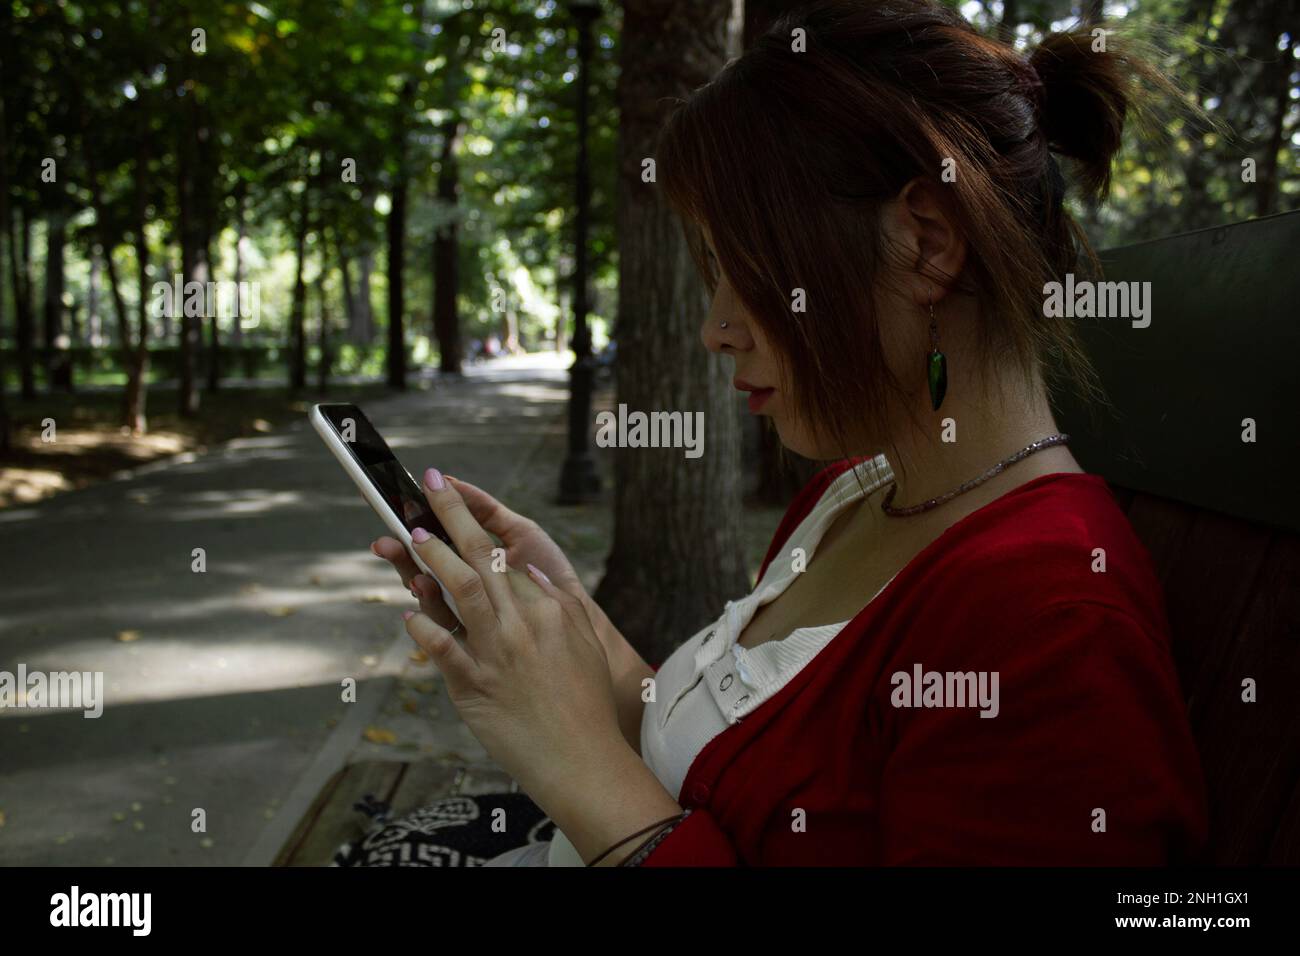 Woman sitting in the street with a smartphone Stock Photo